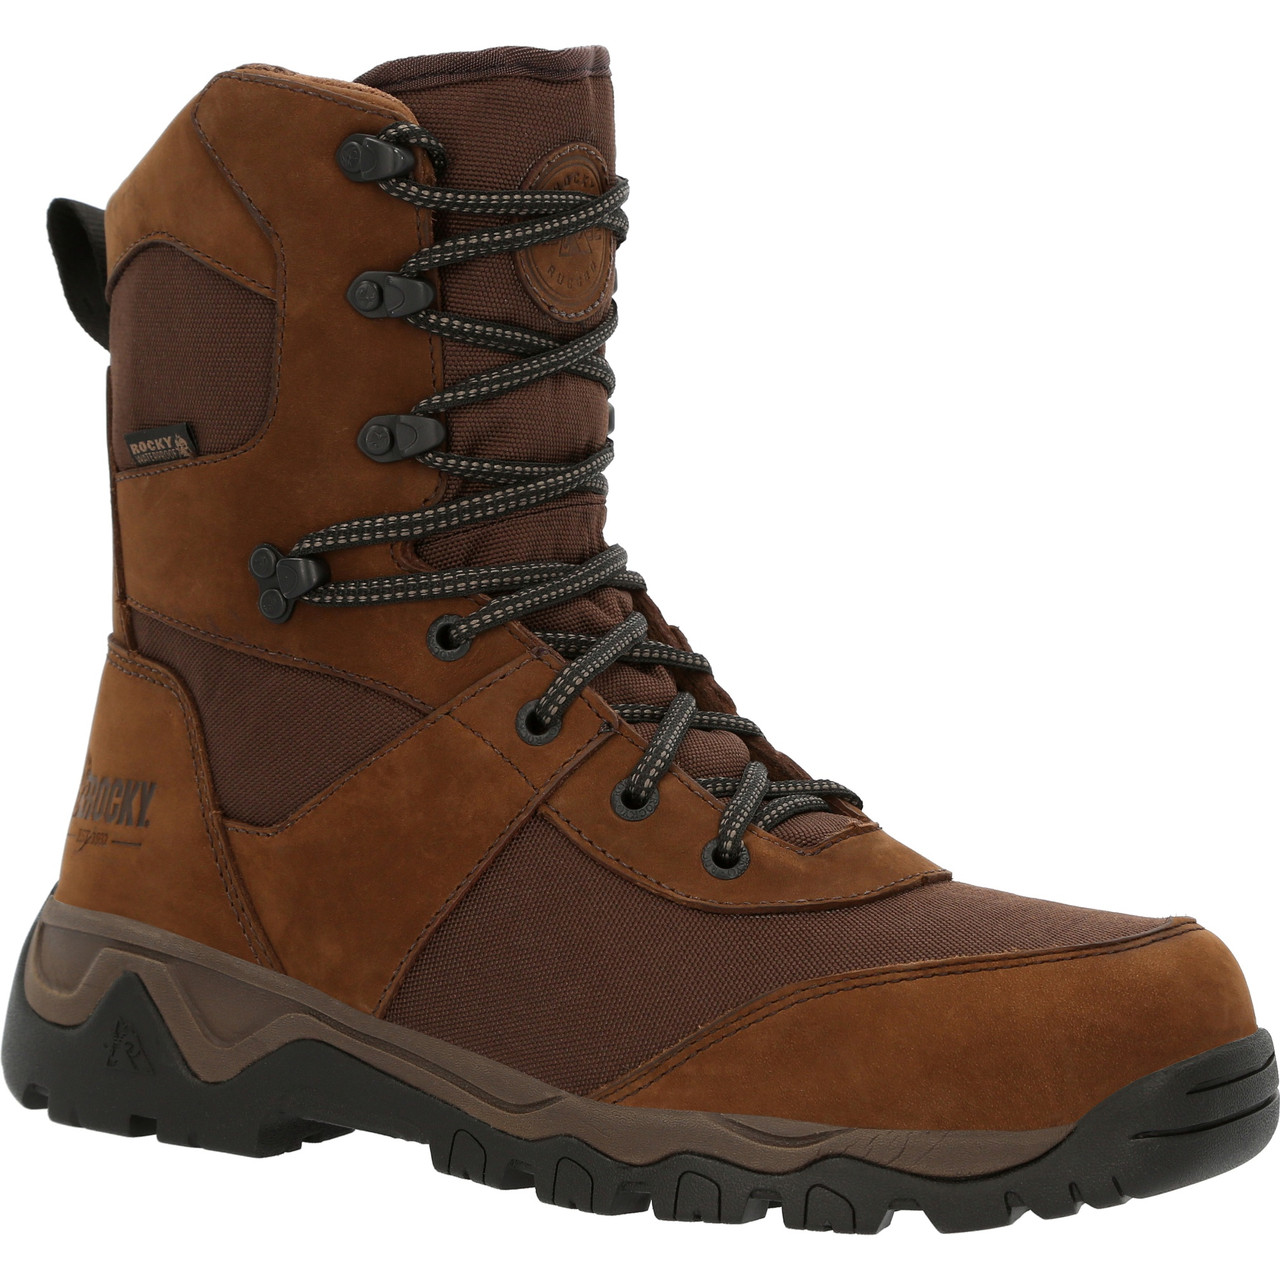 ROCKY RED MOUNTAIN 8" WATERPROOF 400G OUTDOOR BOOTS RKS0546